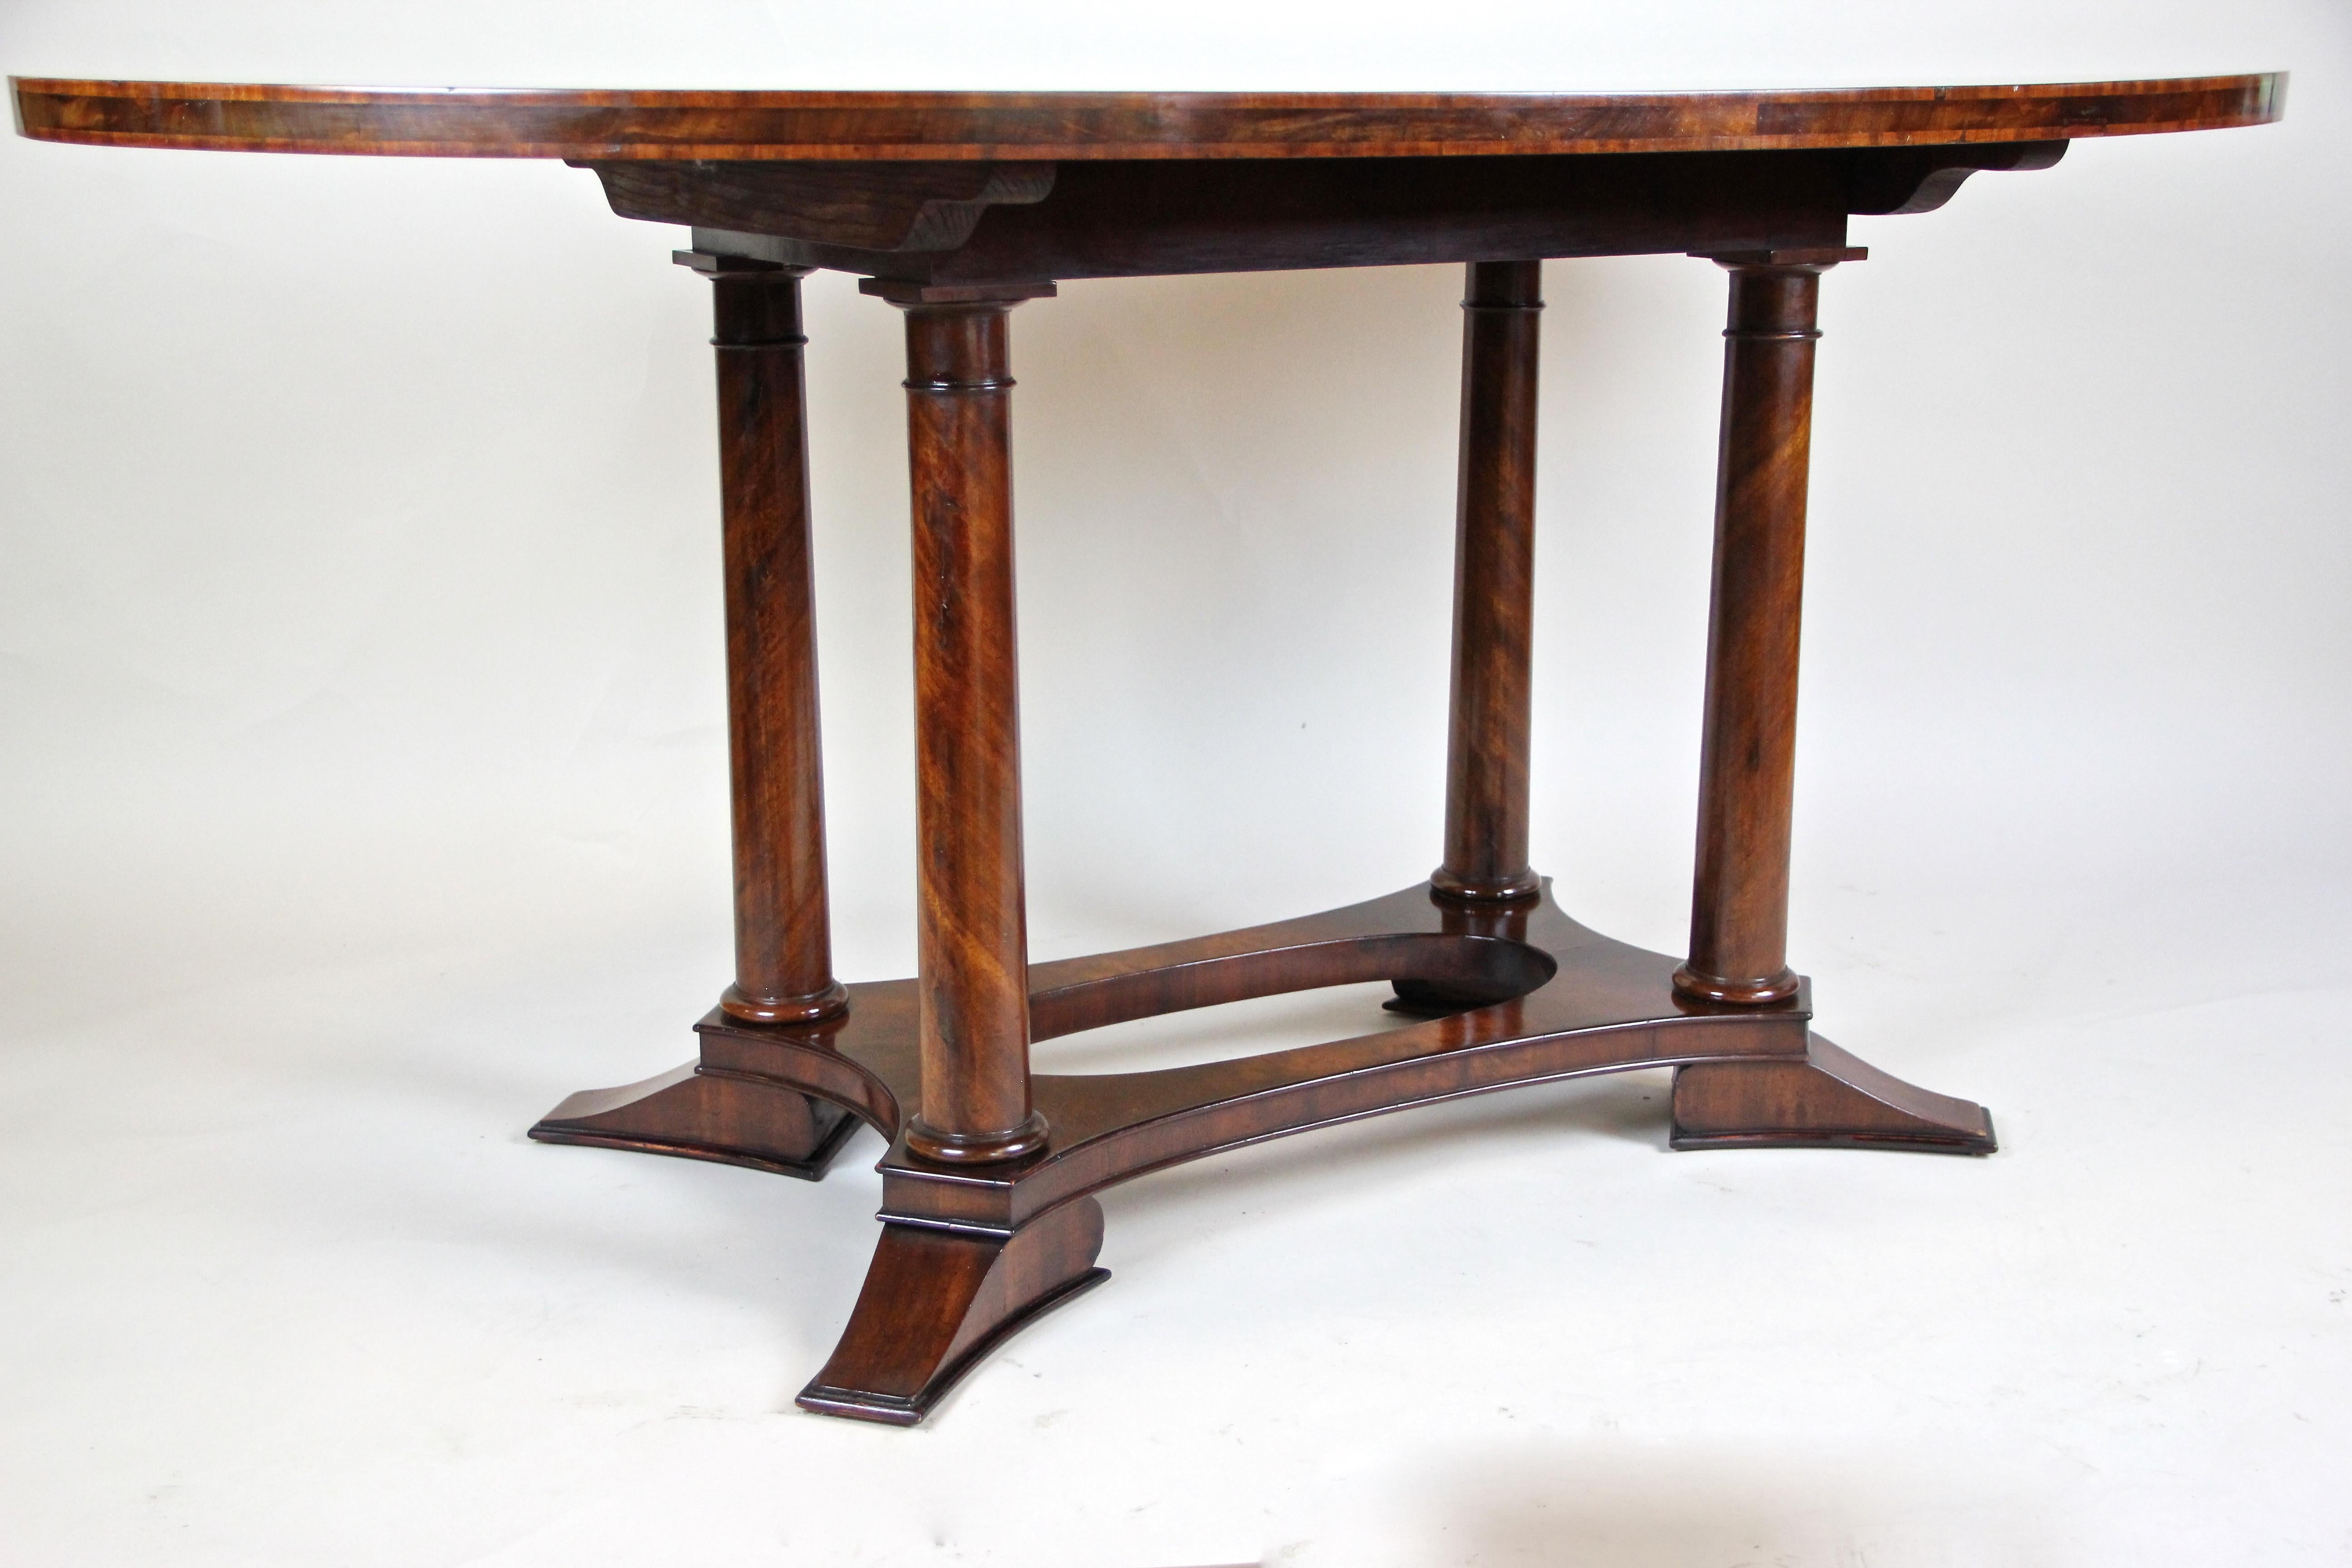 Wonderful Biedermeier mahogany dining table from Austria. Made with attention to details, this table from circa 1840 comes with a timeless shape, veneered in fine mahogany. Not only the oval top plate impresses with its great mirror matched grain